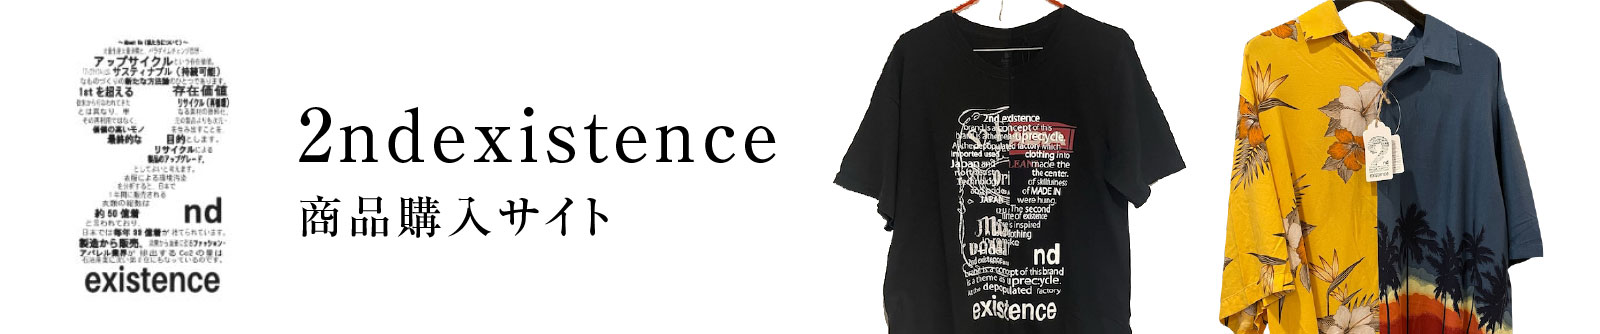 2ndexistence 商品購入サイト